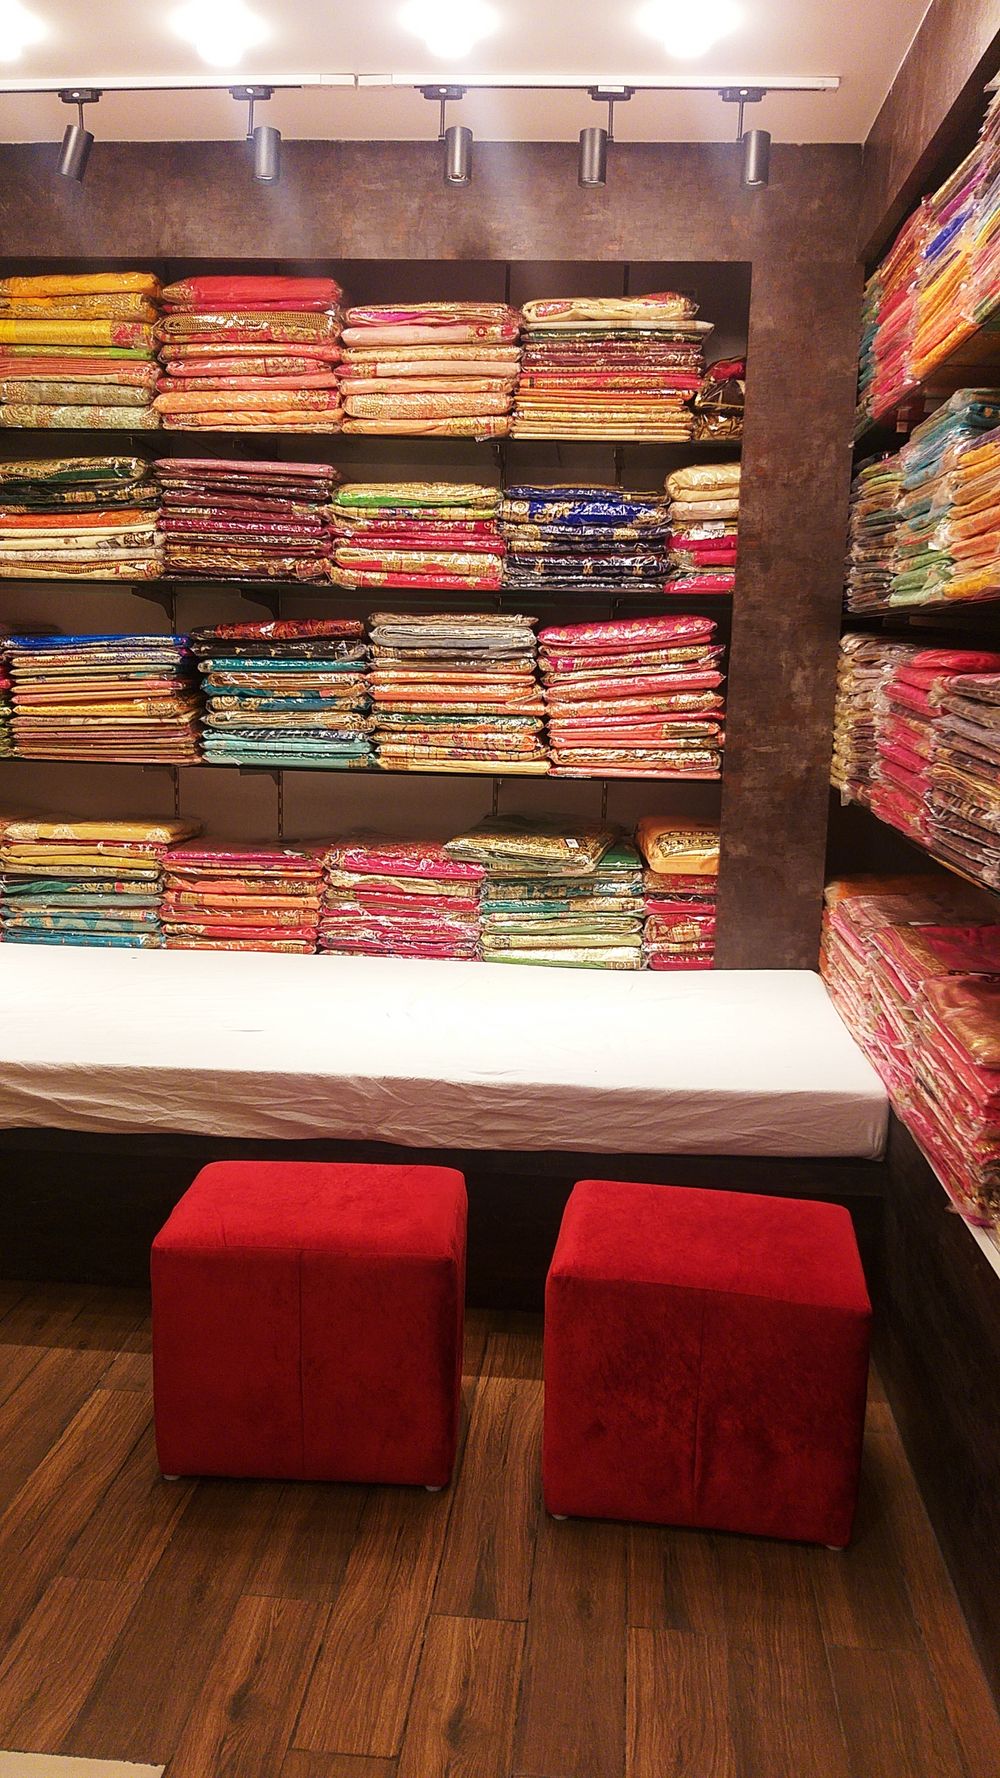 Photo From SAKSHI - The Wedding Store - By Sakshi- The Wedding Store